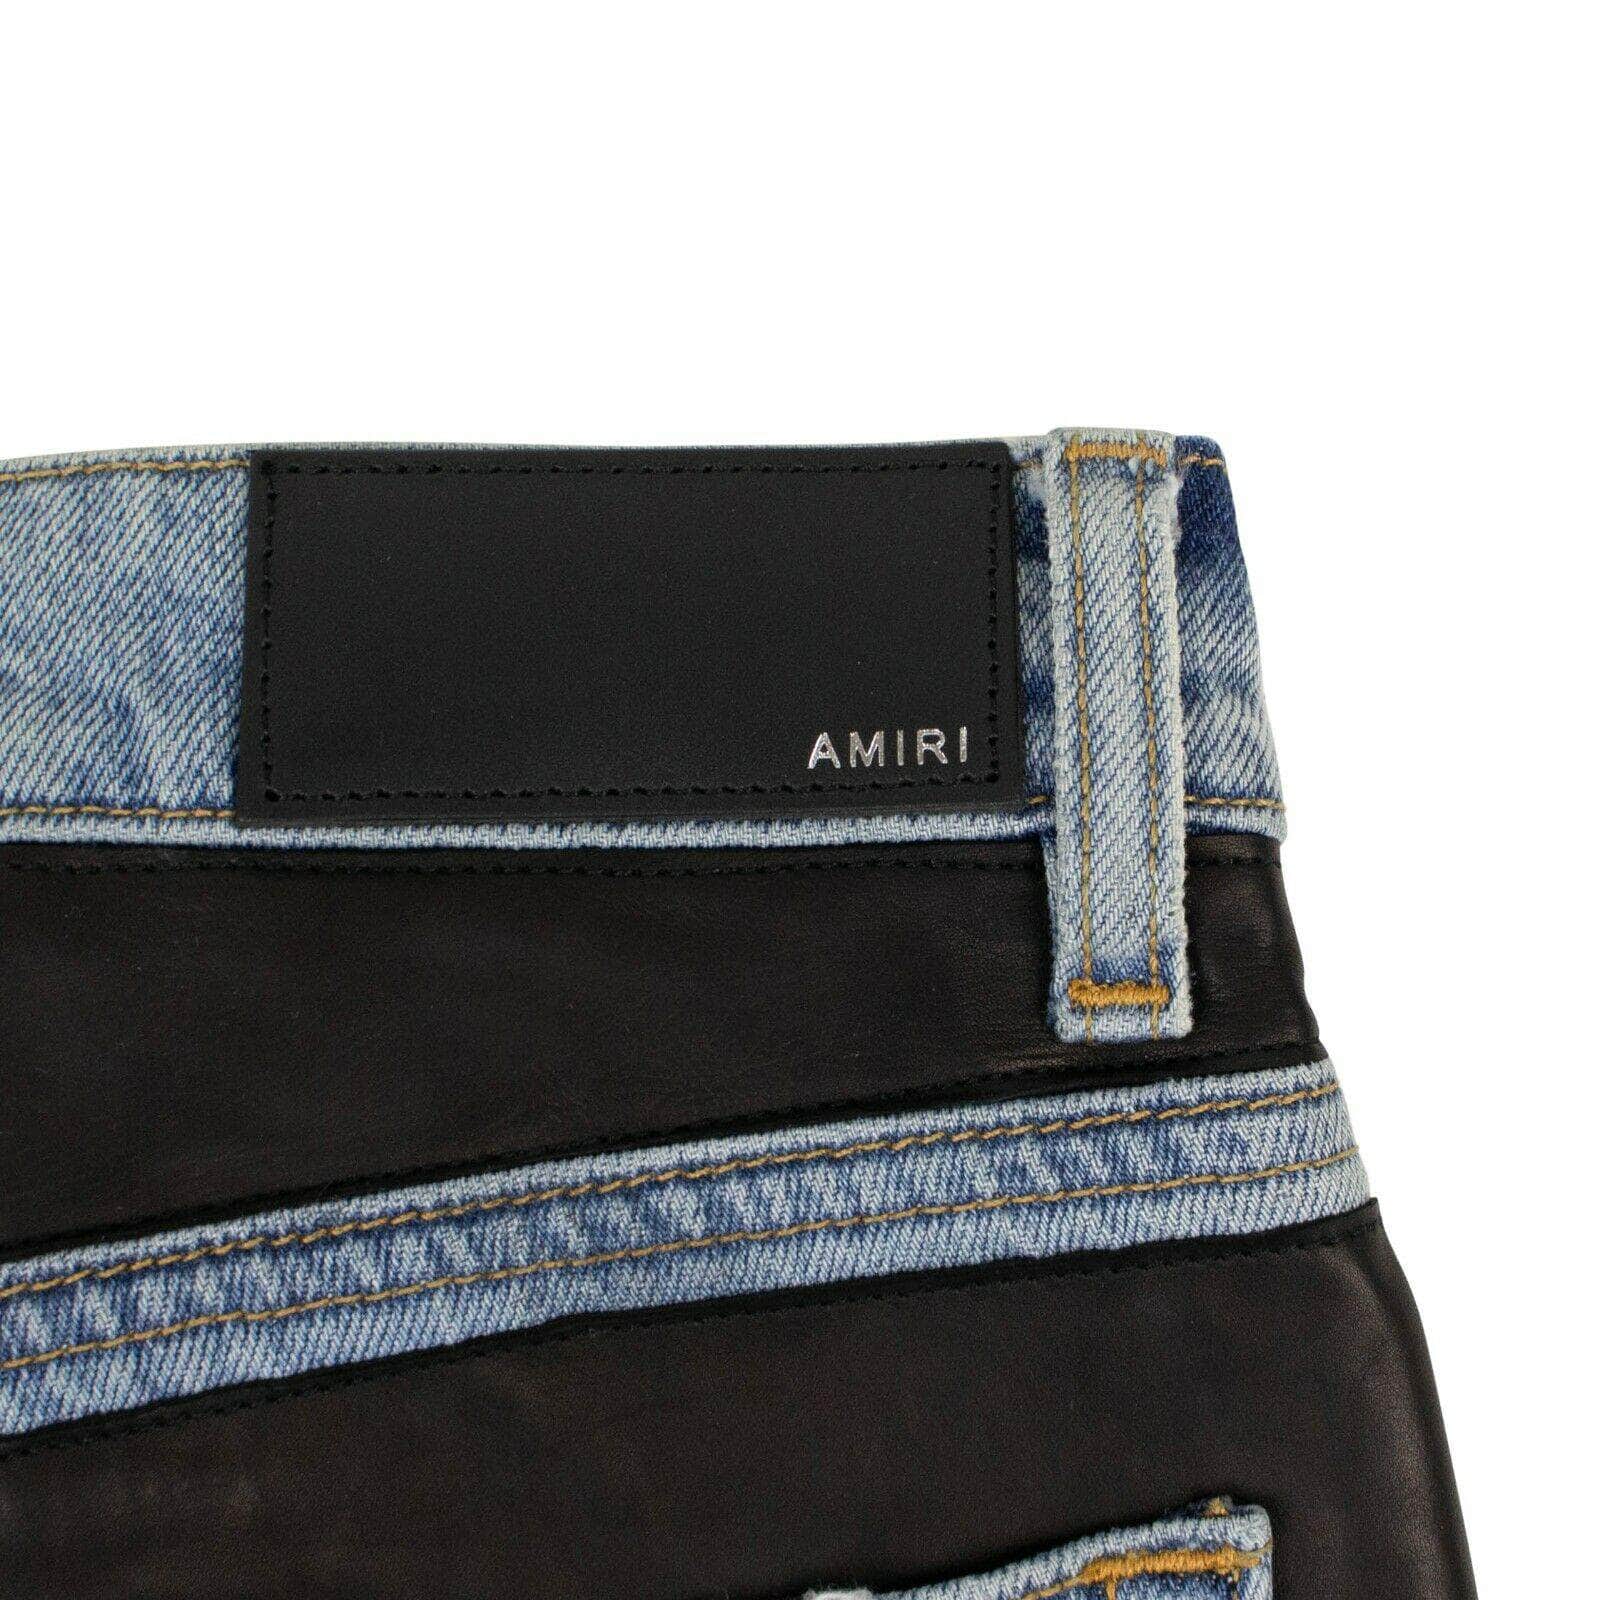 Amiri 250-500, amiri, AMR, AWC1, chicmi, couponcollection, gender-womens, july4th, main-clothing, sale-enable, size-24, size-25, size-26, size-27, size-28, size-29, size-30, SPO, womens-straight-jeans Women's Black Leather And Denim Straight Jeans